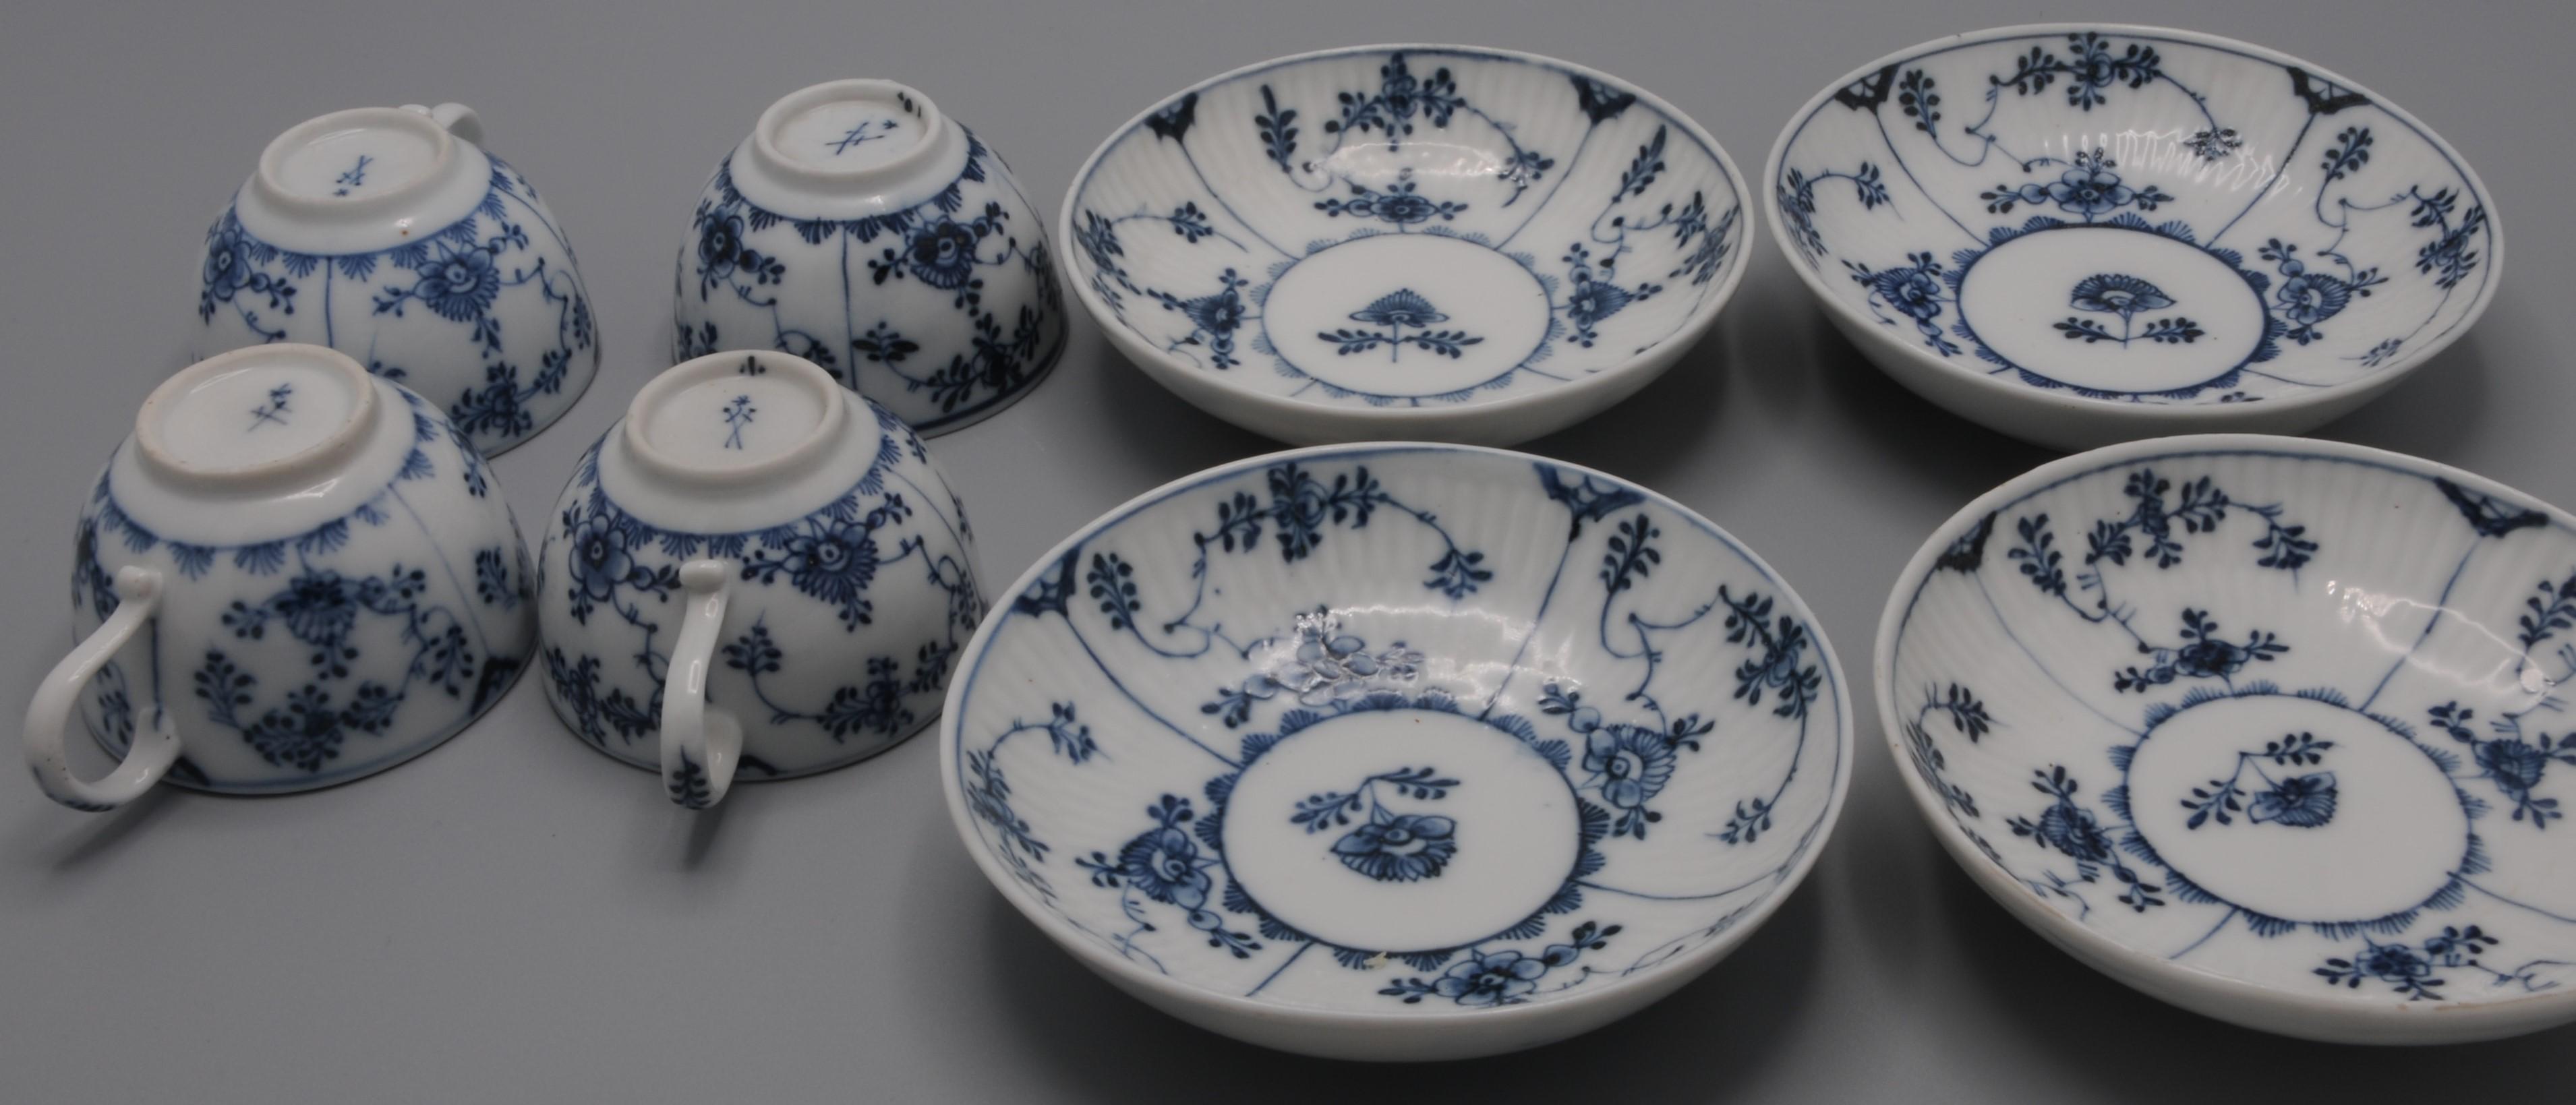 18th Century Meissen - 4 cups and saucers 'Strohblumenmuster', Marcolini period 1774-1814 For Sale